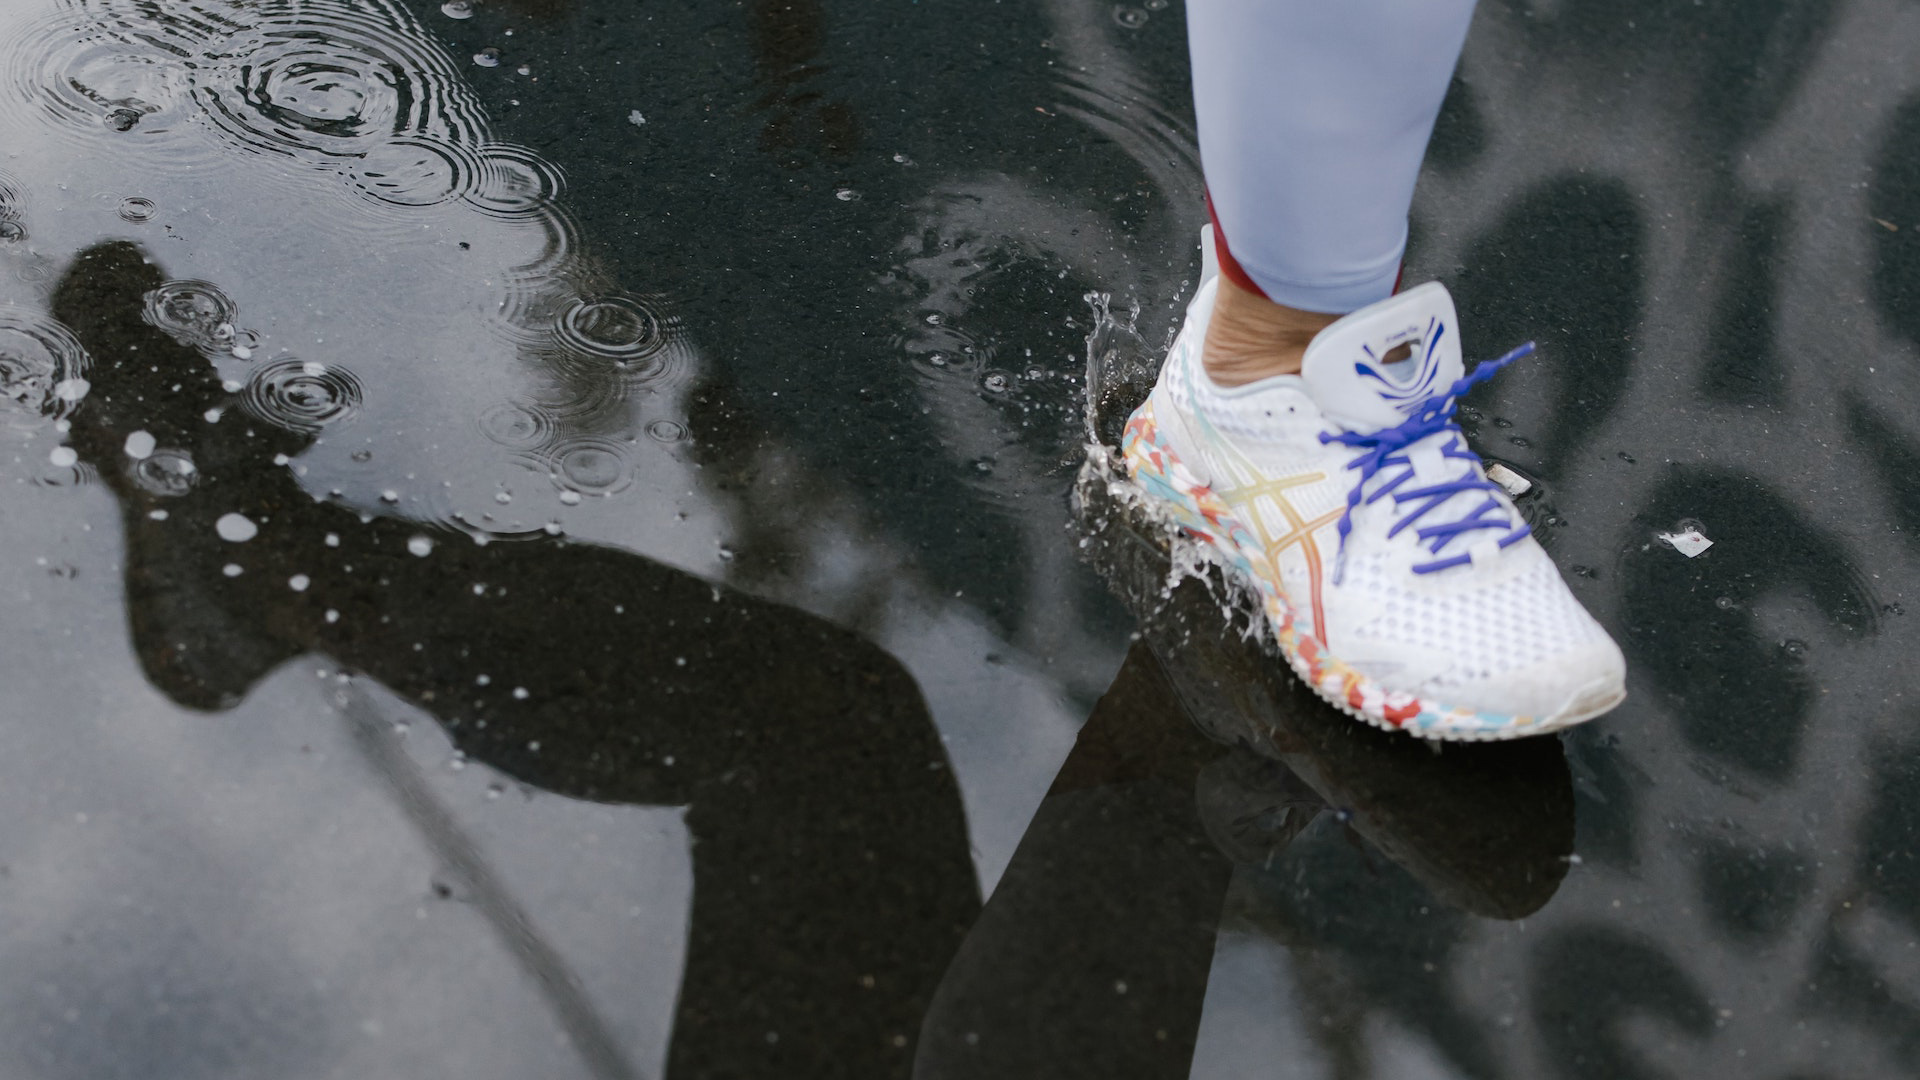 Close up of a foot in a running shoe on wet ground with the reflection of the person's other leg